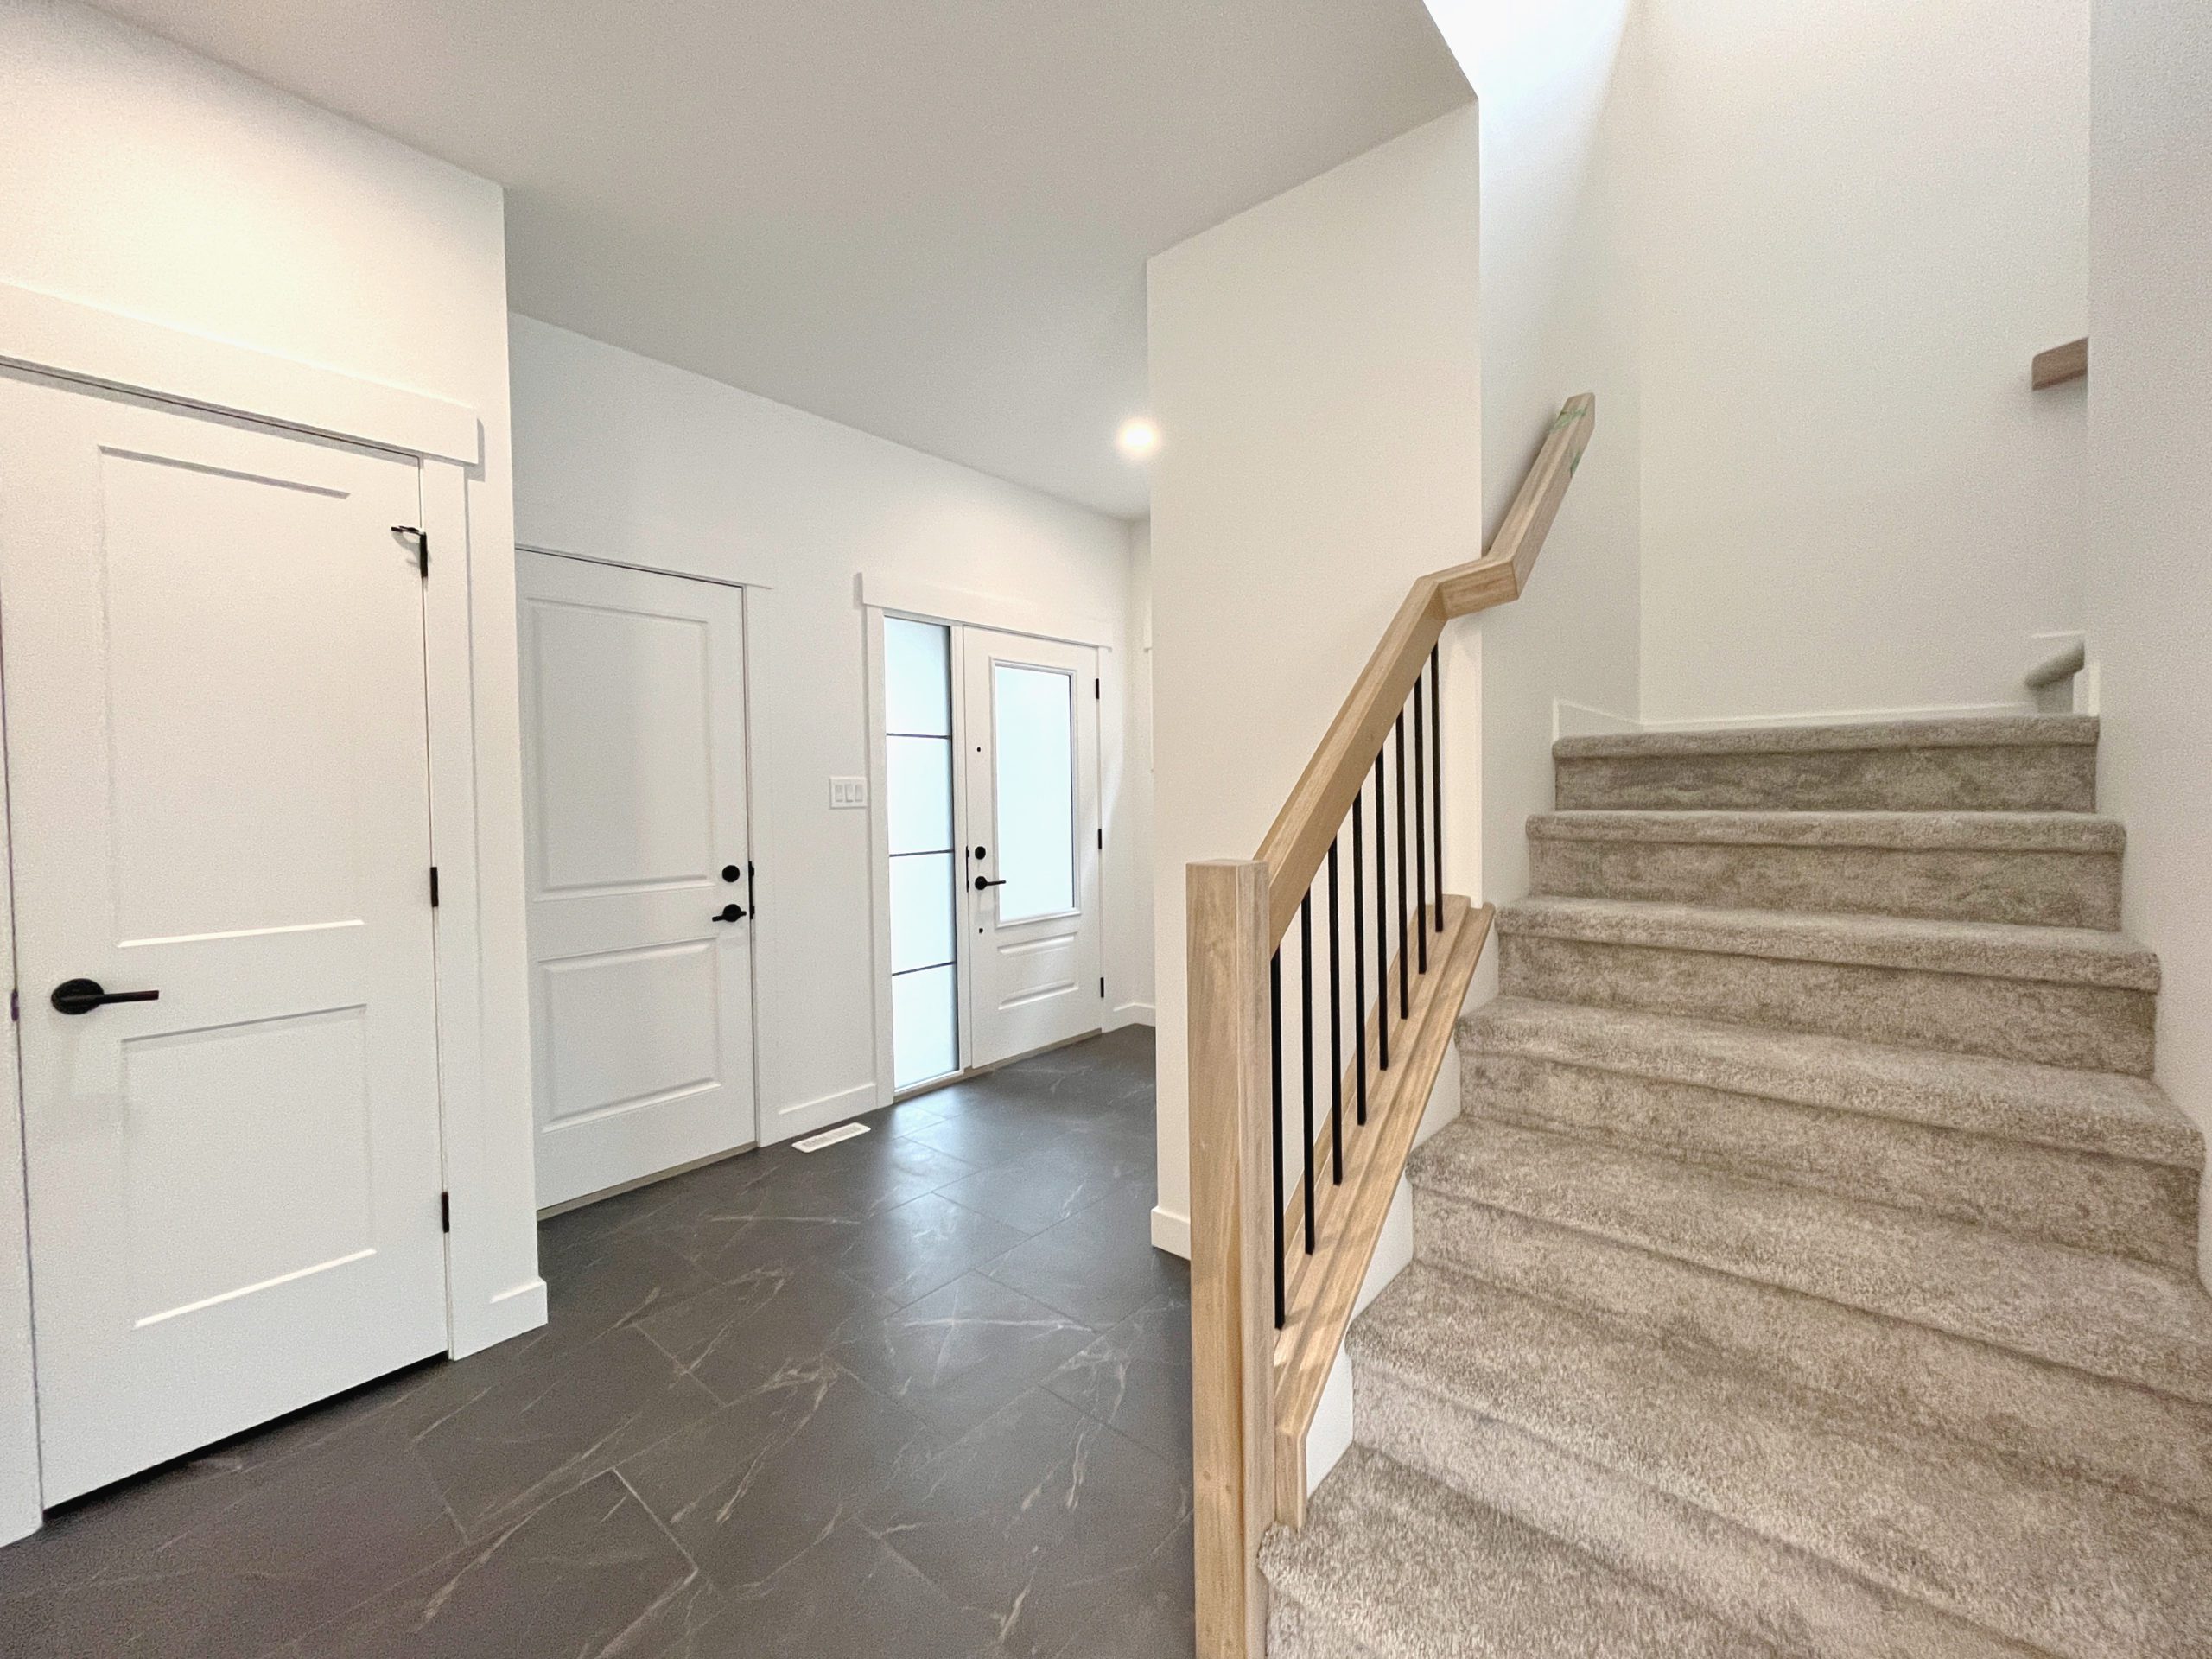 A staircase leading upstairs with carpet and the entryway to garage and front door with tiled flooring.